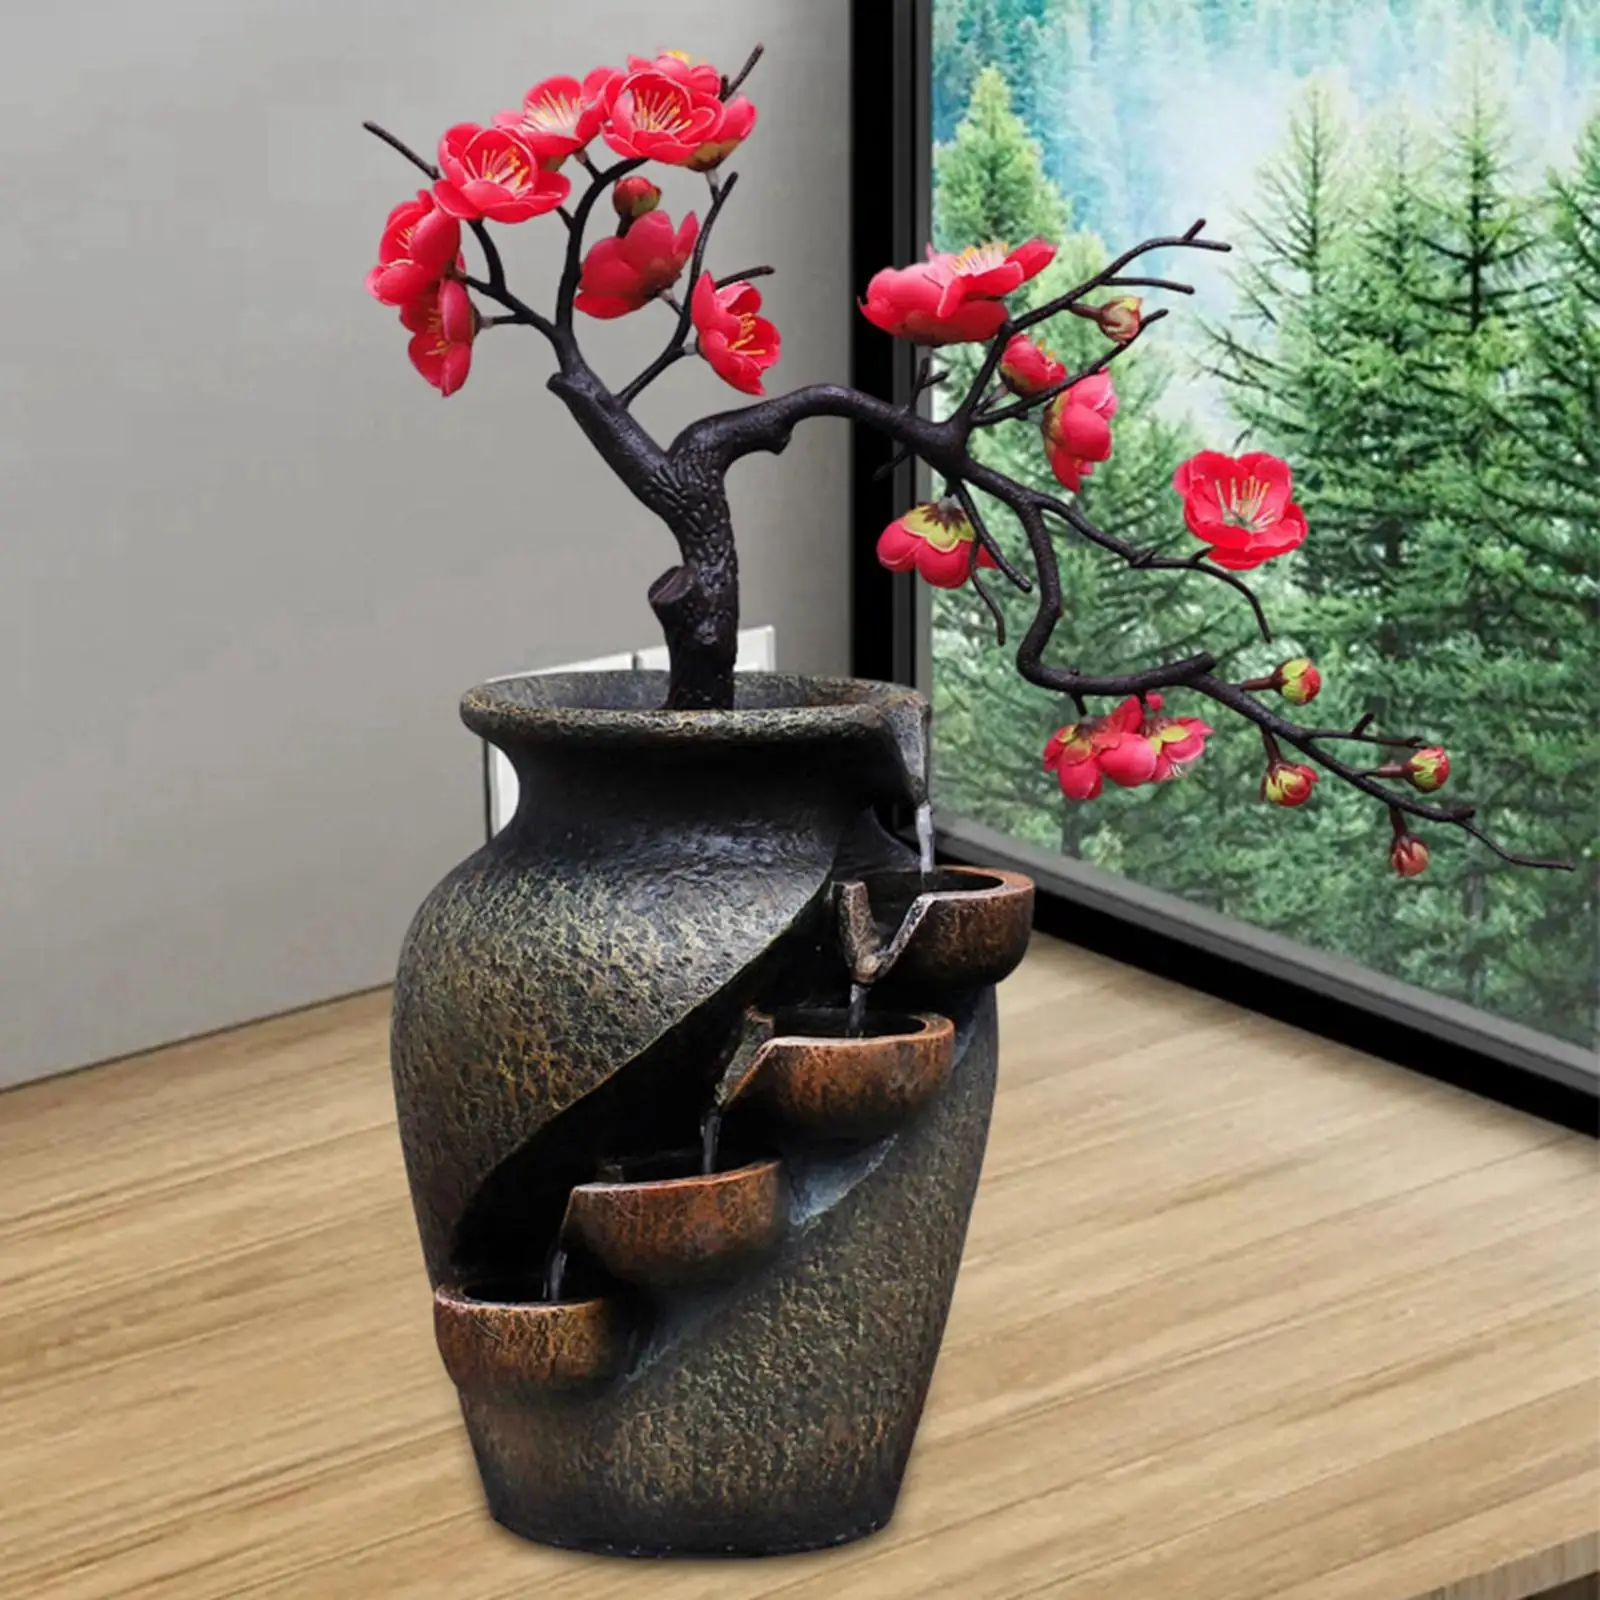 Creative Indoor Water Fountain Flower Vase Design Soothing Relaxation Landscape Ornament for Desktop SPA Garden Home Decorations